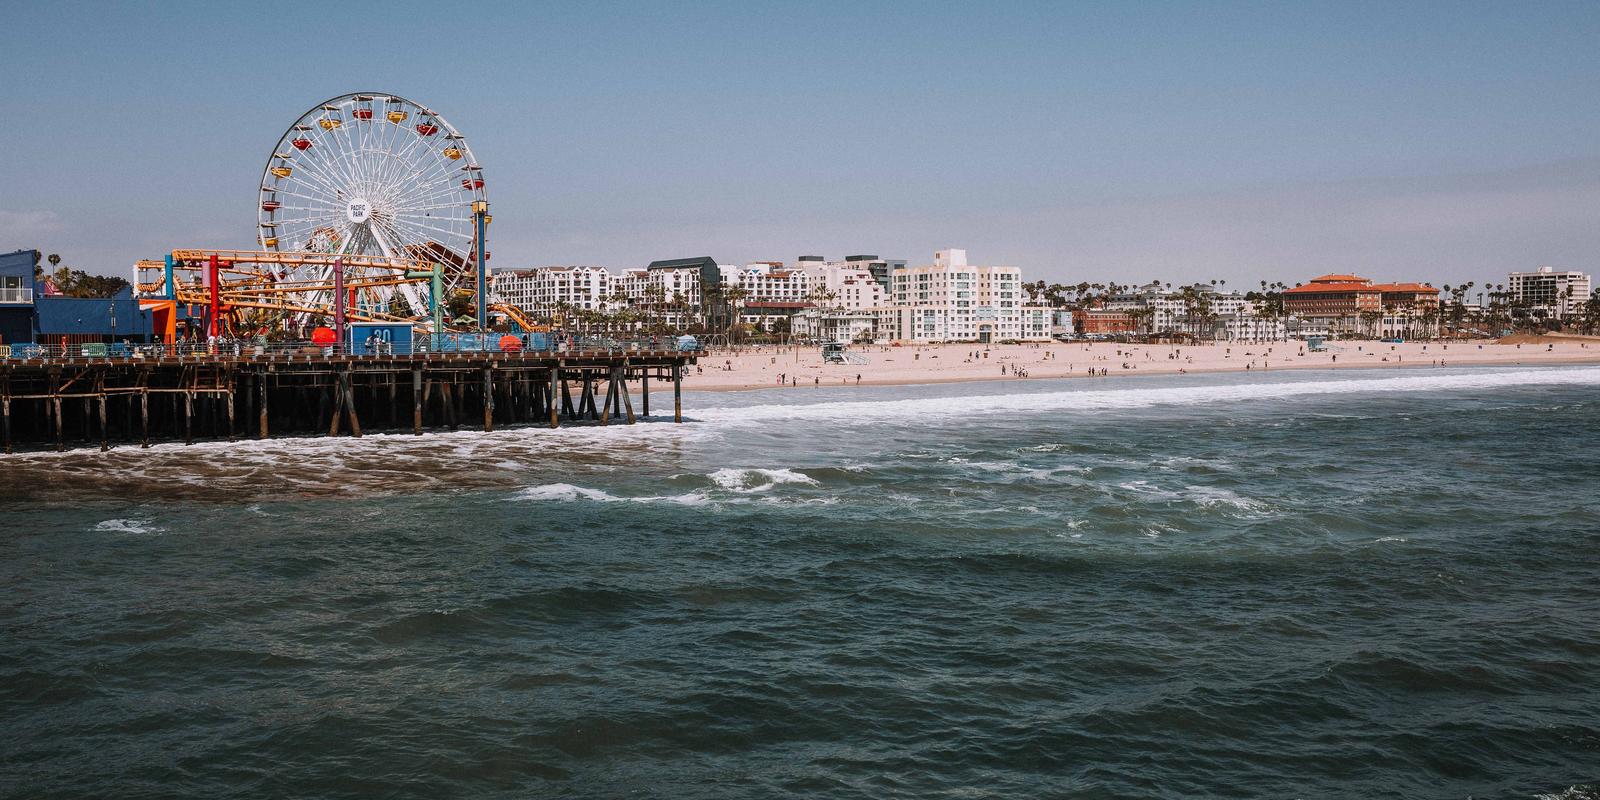 View from the ocean of rollercoaster on the Santa Monica Pier